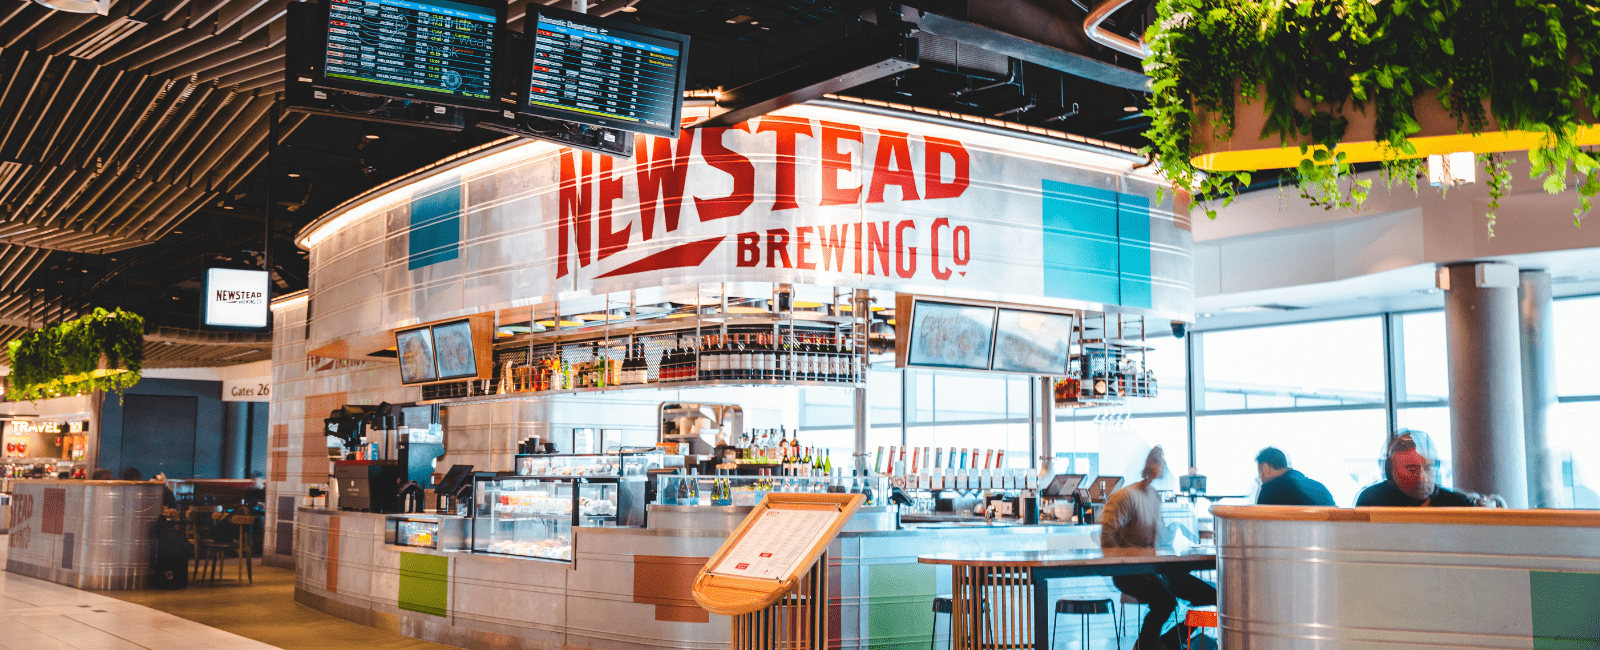 Newstead Brewing Co bar and dining area